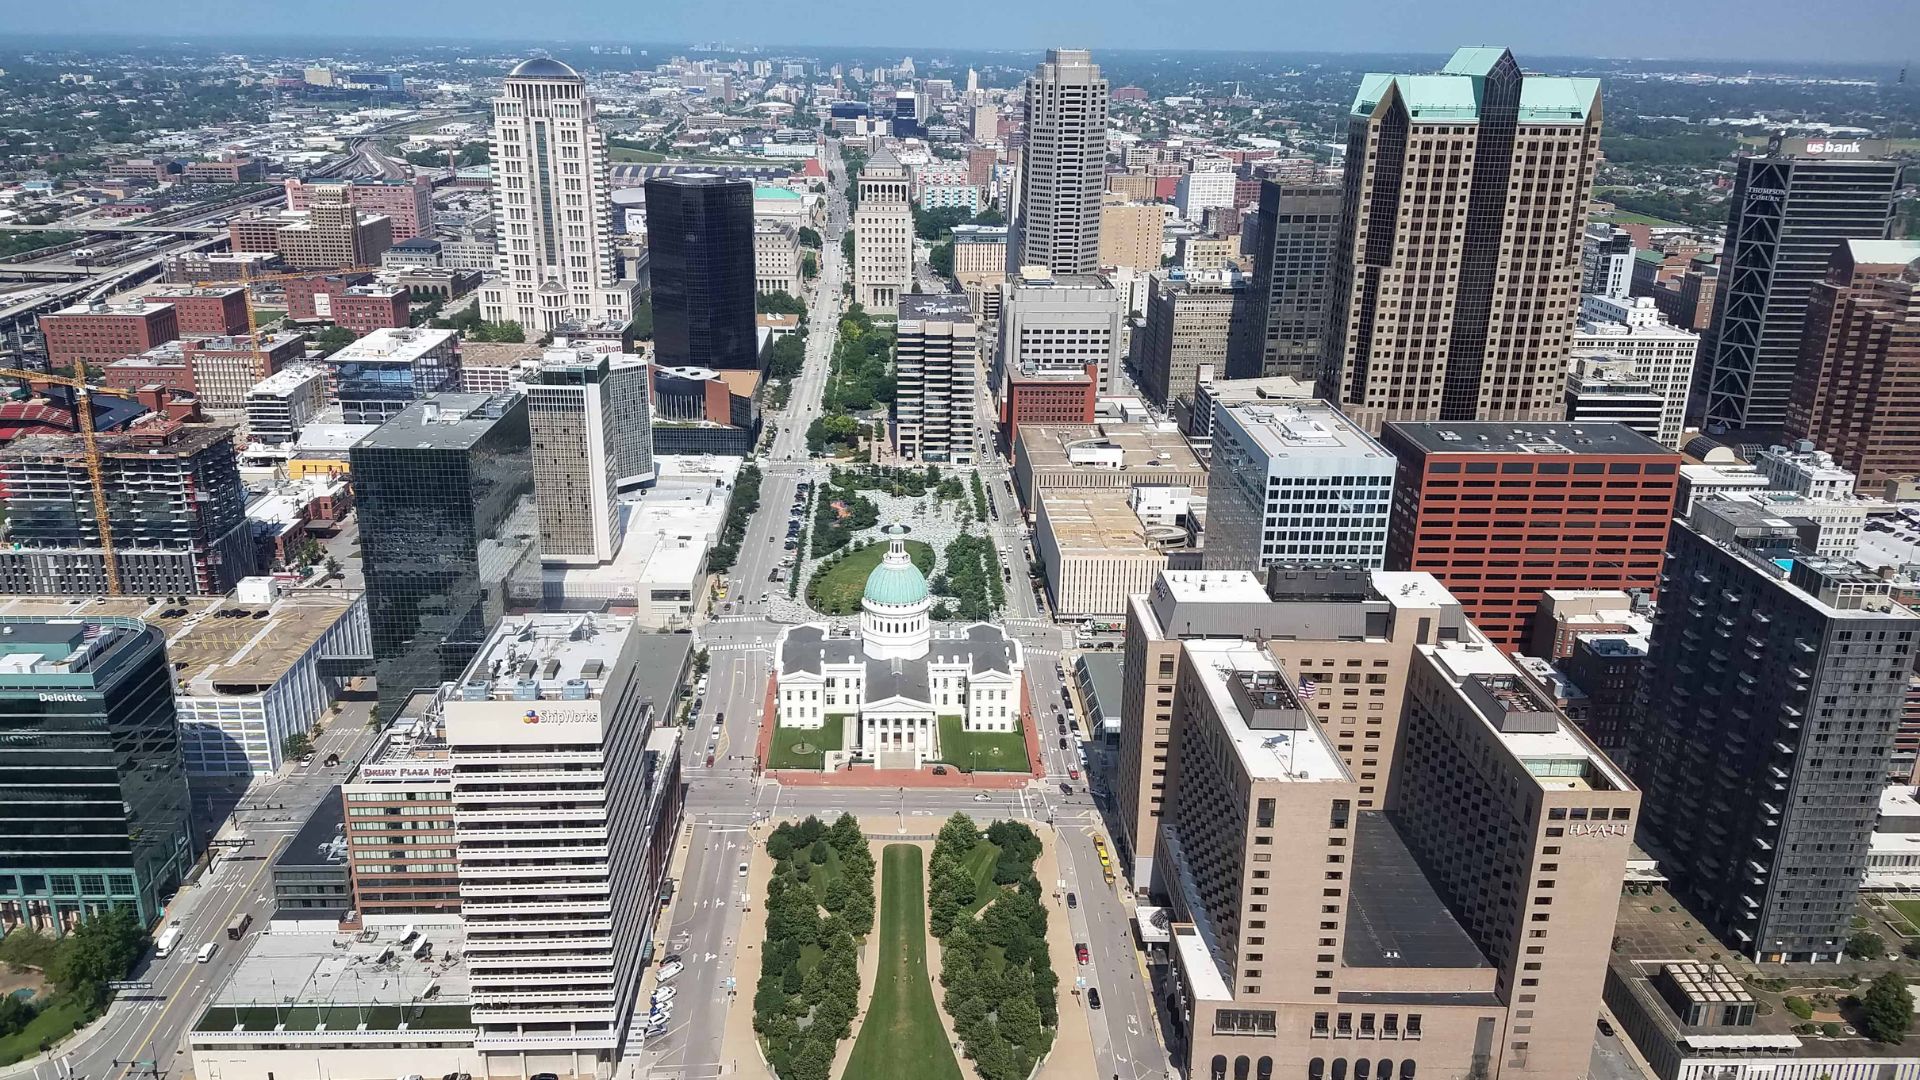 From the top of the Gateway Arch, you can see across downtown St. Louis.